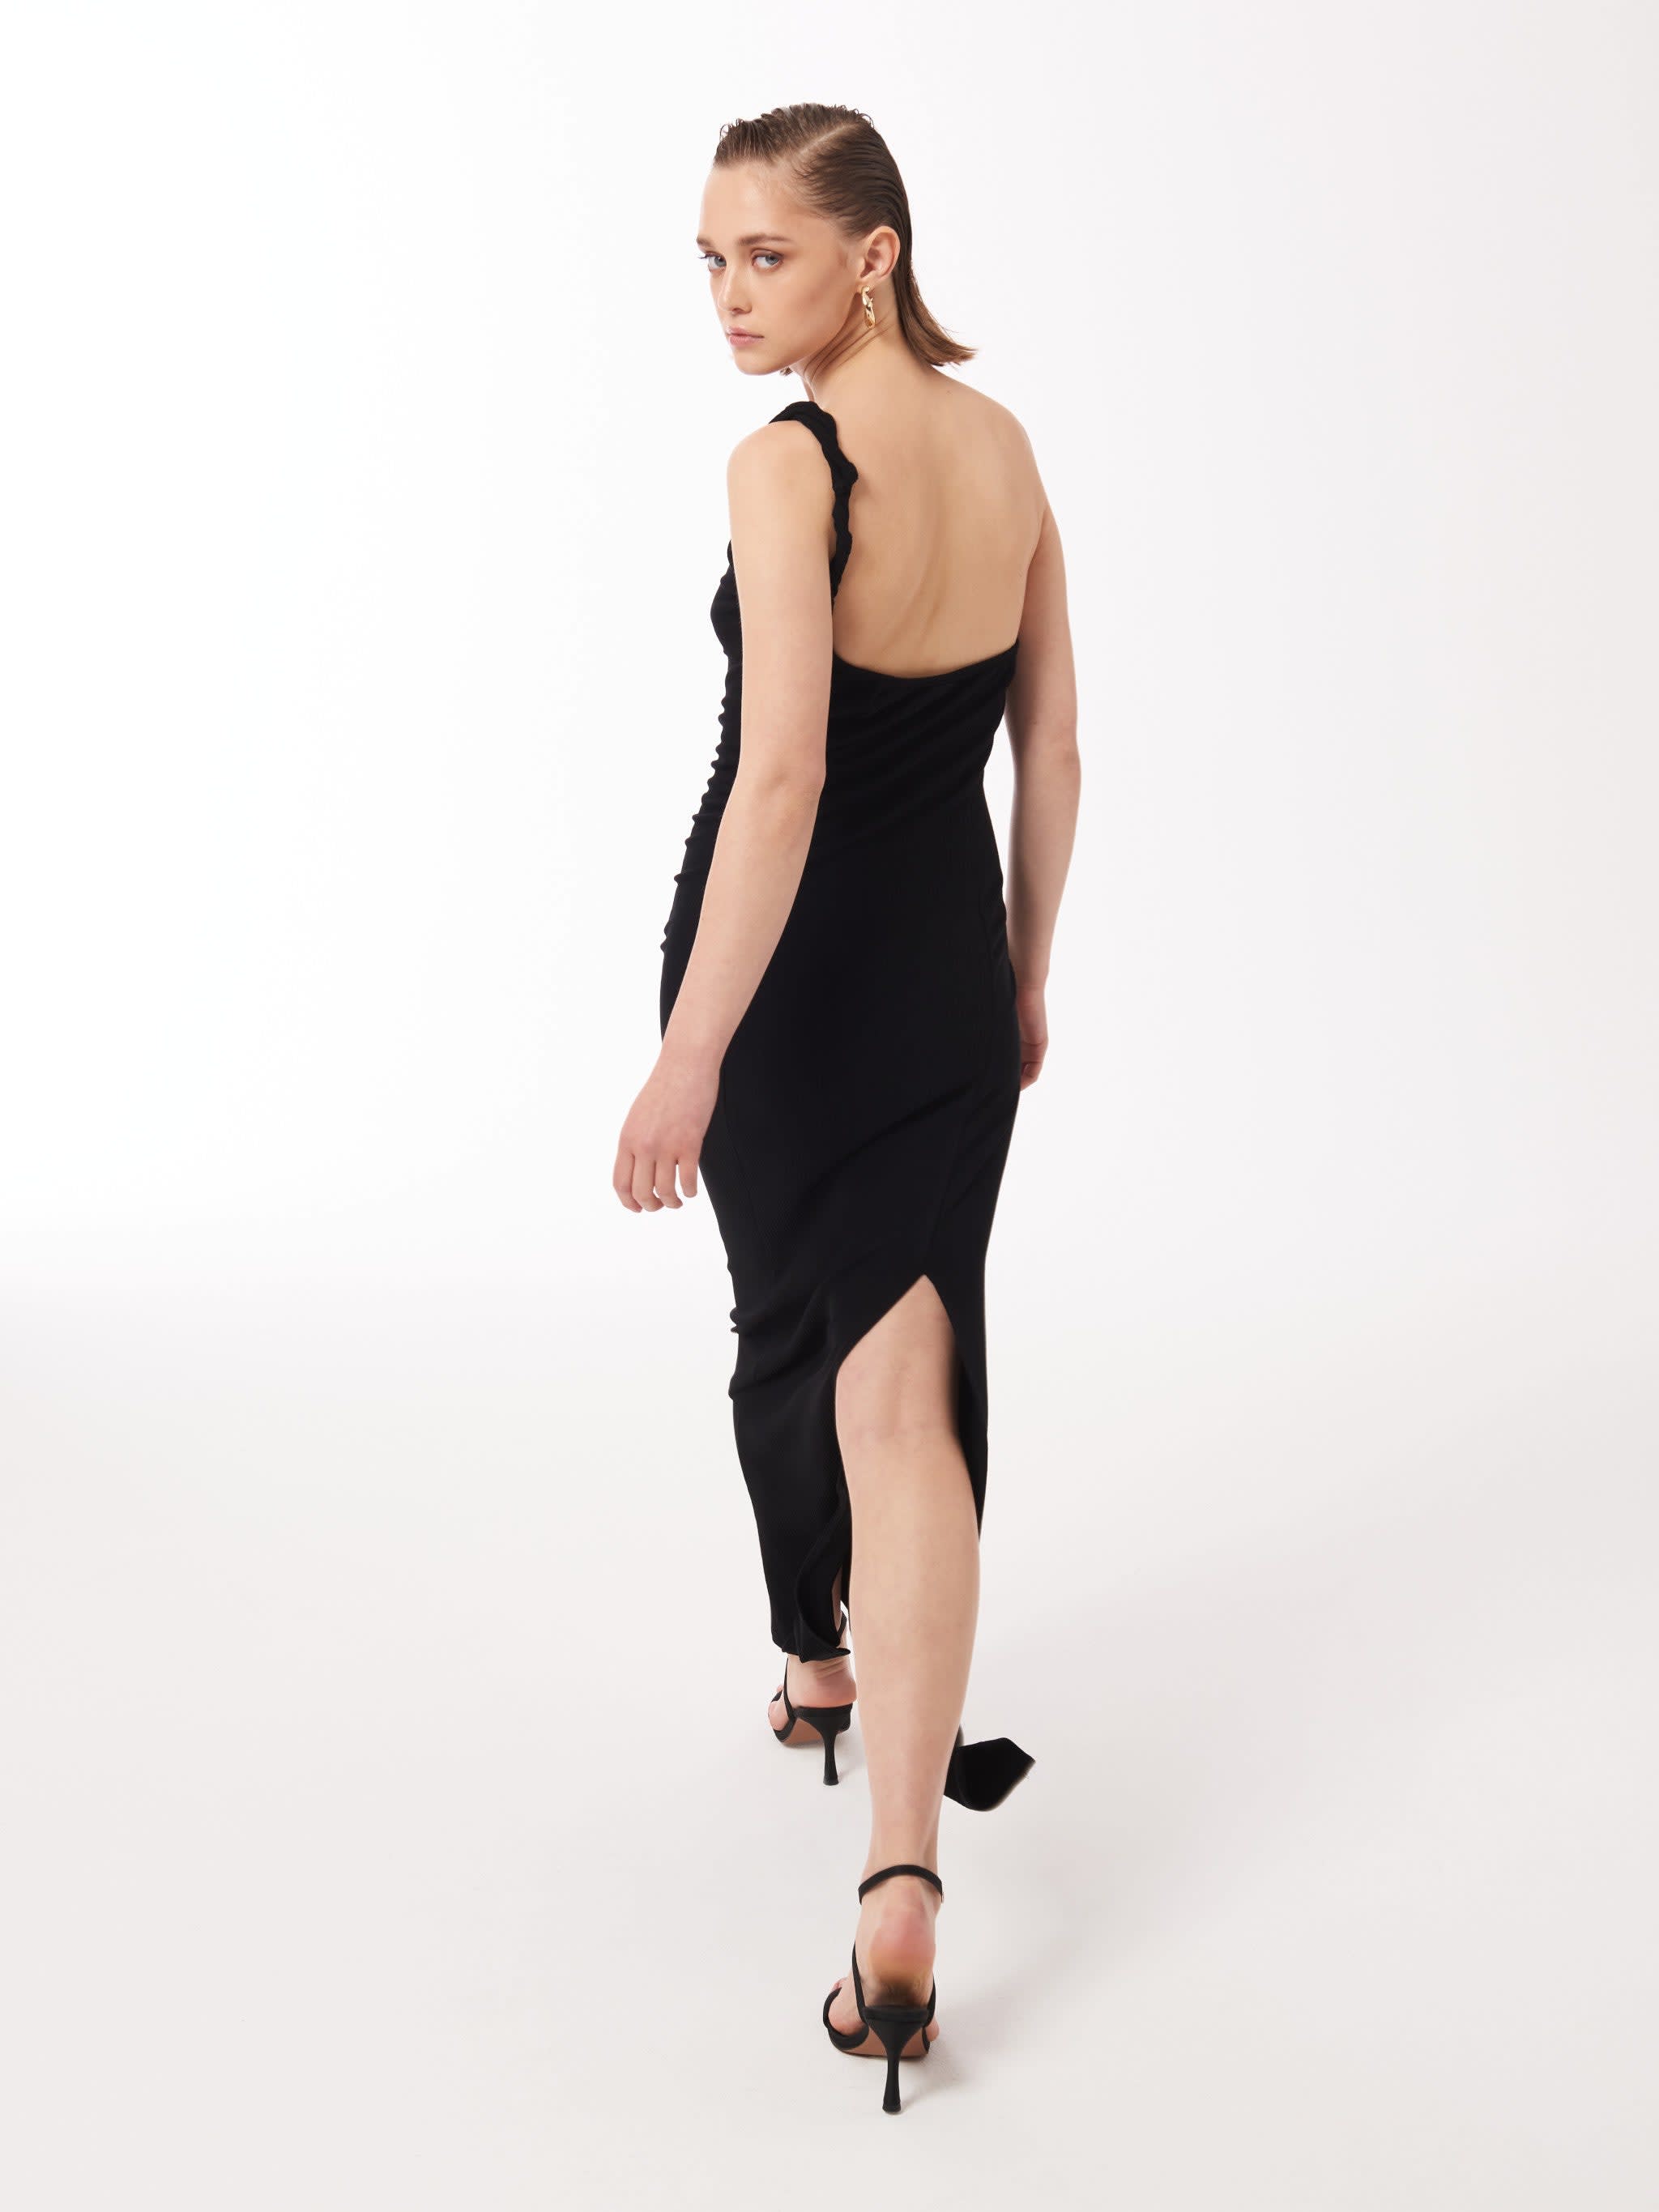 Two-Way Single Shoulder Twisted Black Badger SOUR | Wolf Strap FIGS Maxi | In Dress 